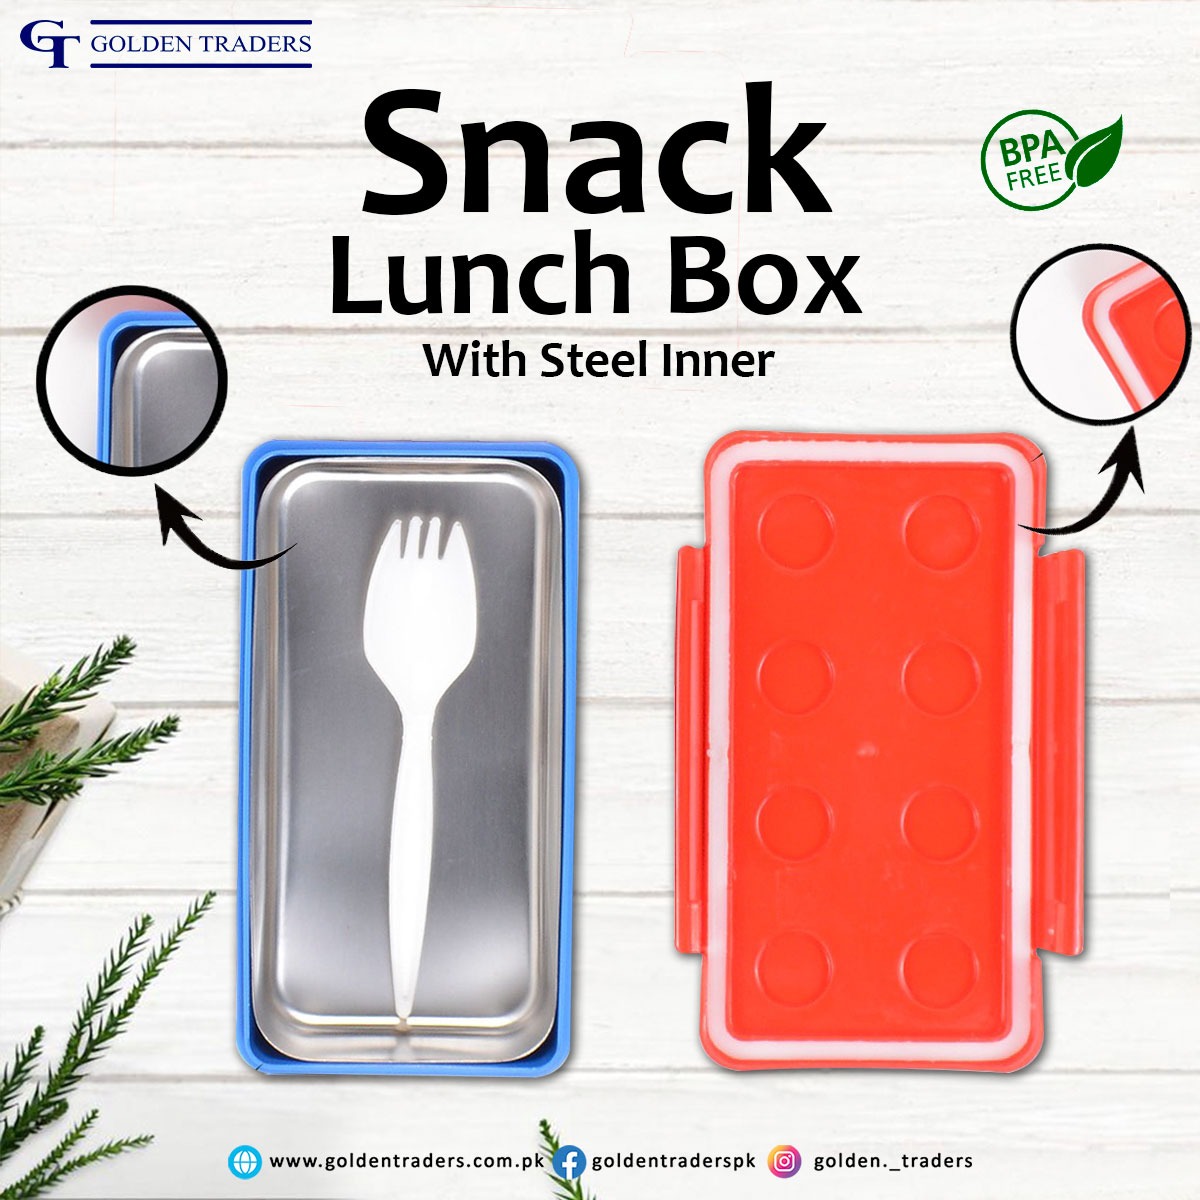 Snack Lunchbox with Steel Inner